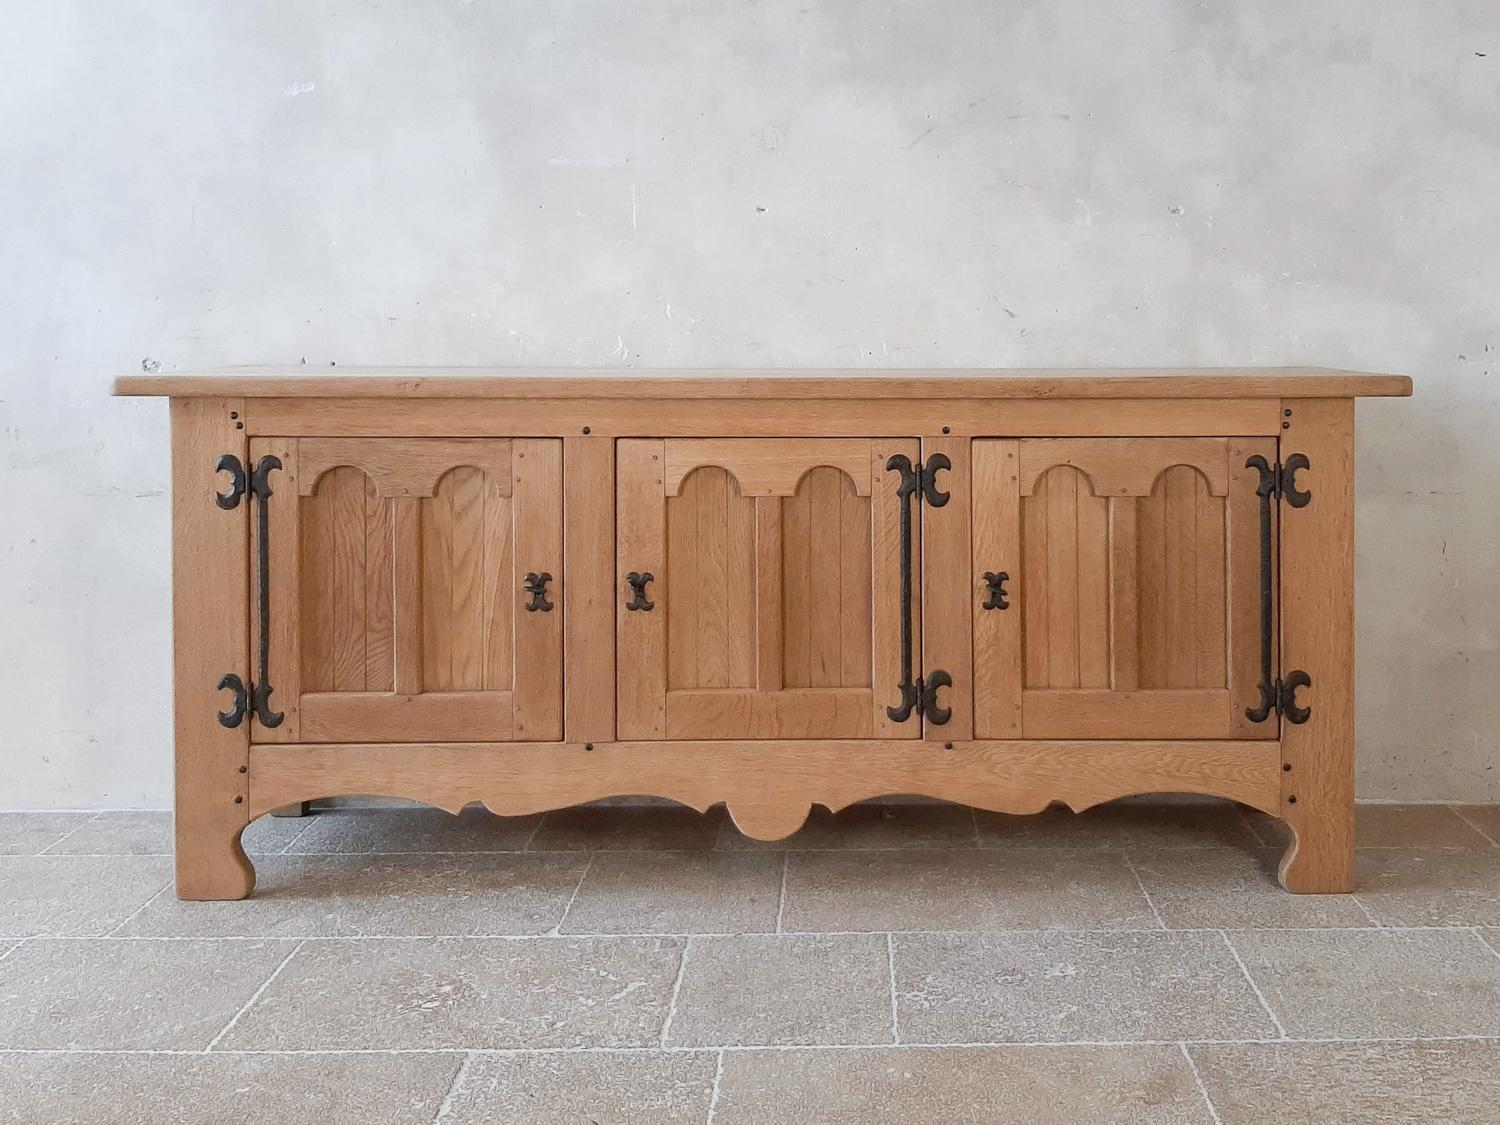 Midcentury Spanish oak credenza. Stunning colonial, brutalist style solid oak sideboard. With three door with double arched panels. Large wrought iron hinges and rivets. With carved detail at the base along the front and sides. Behind the three